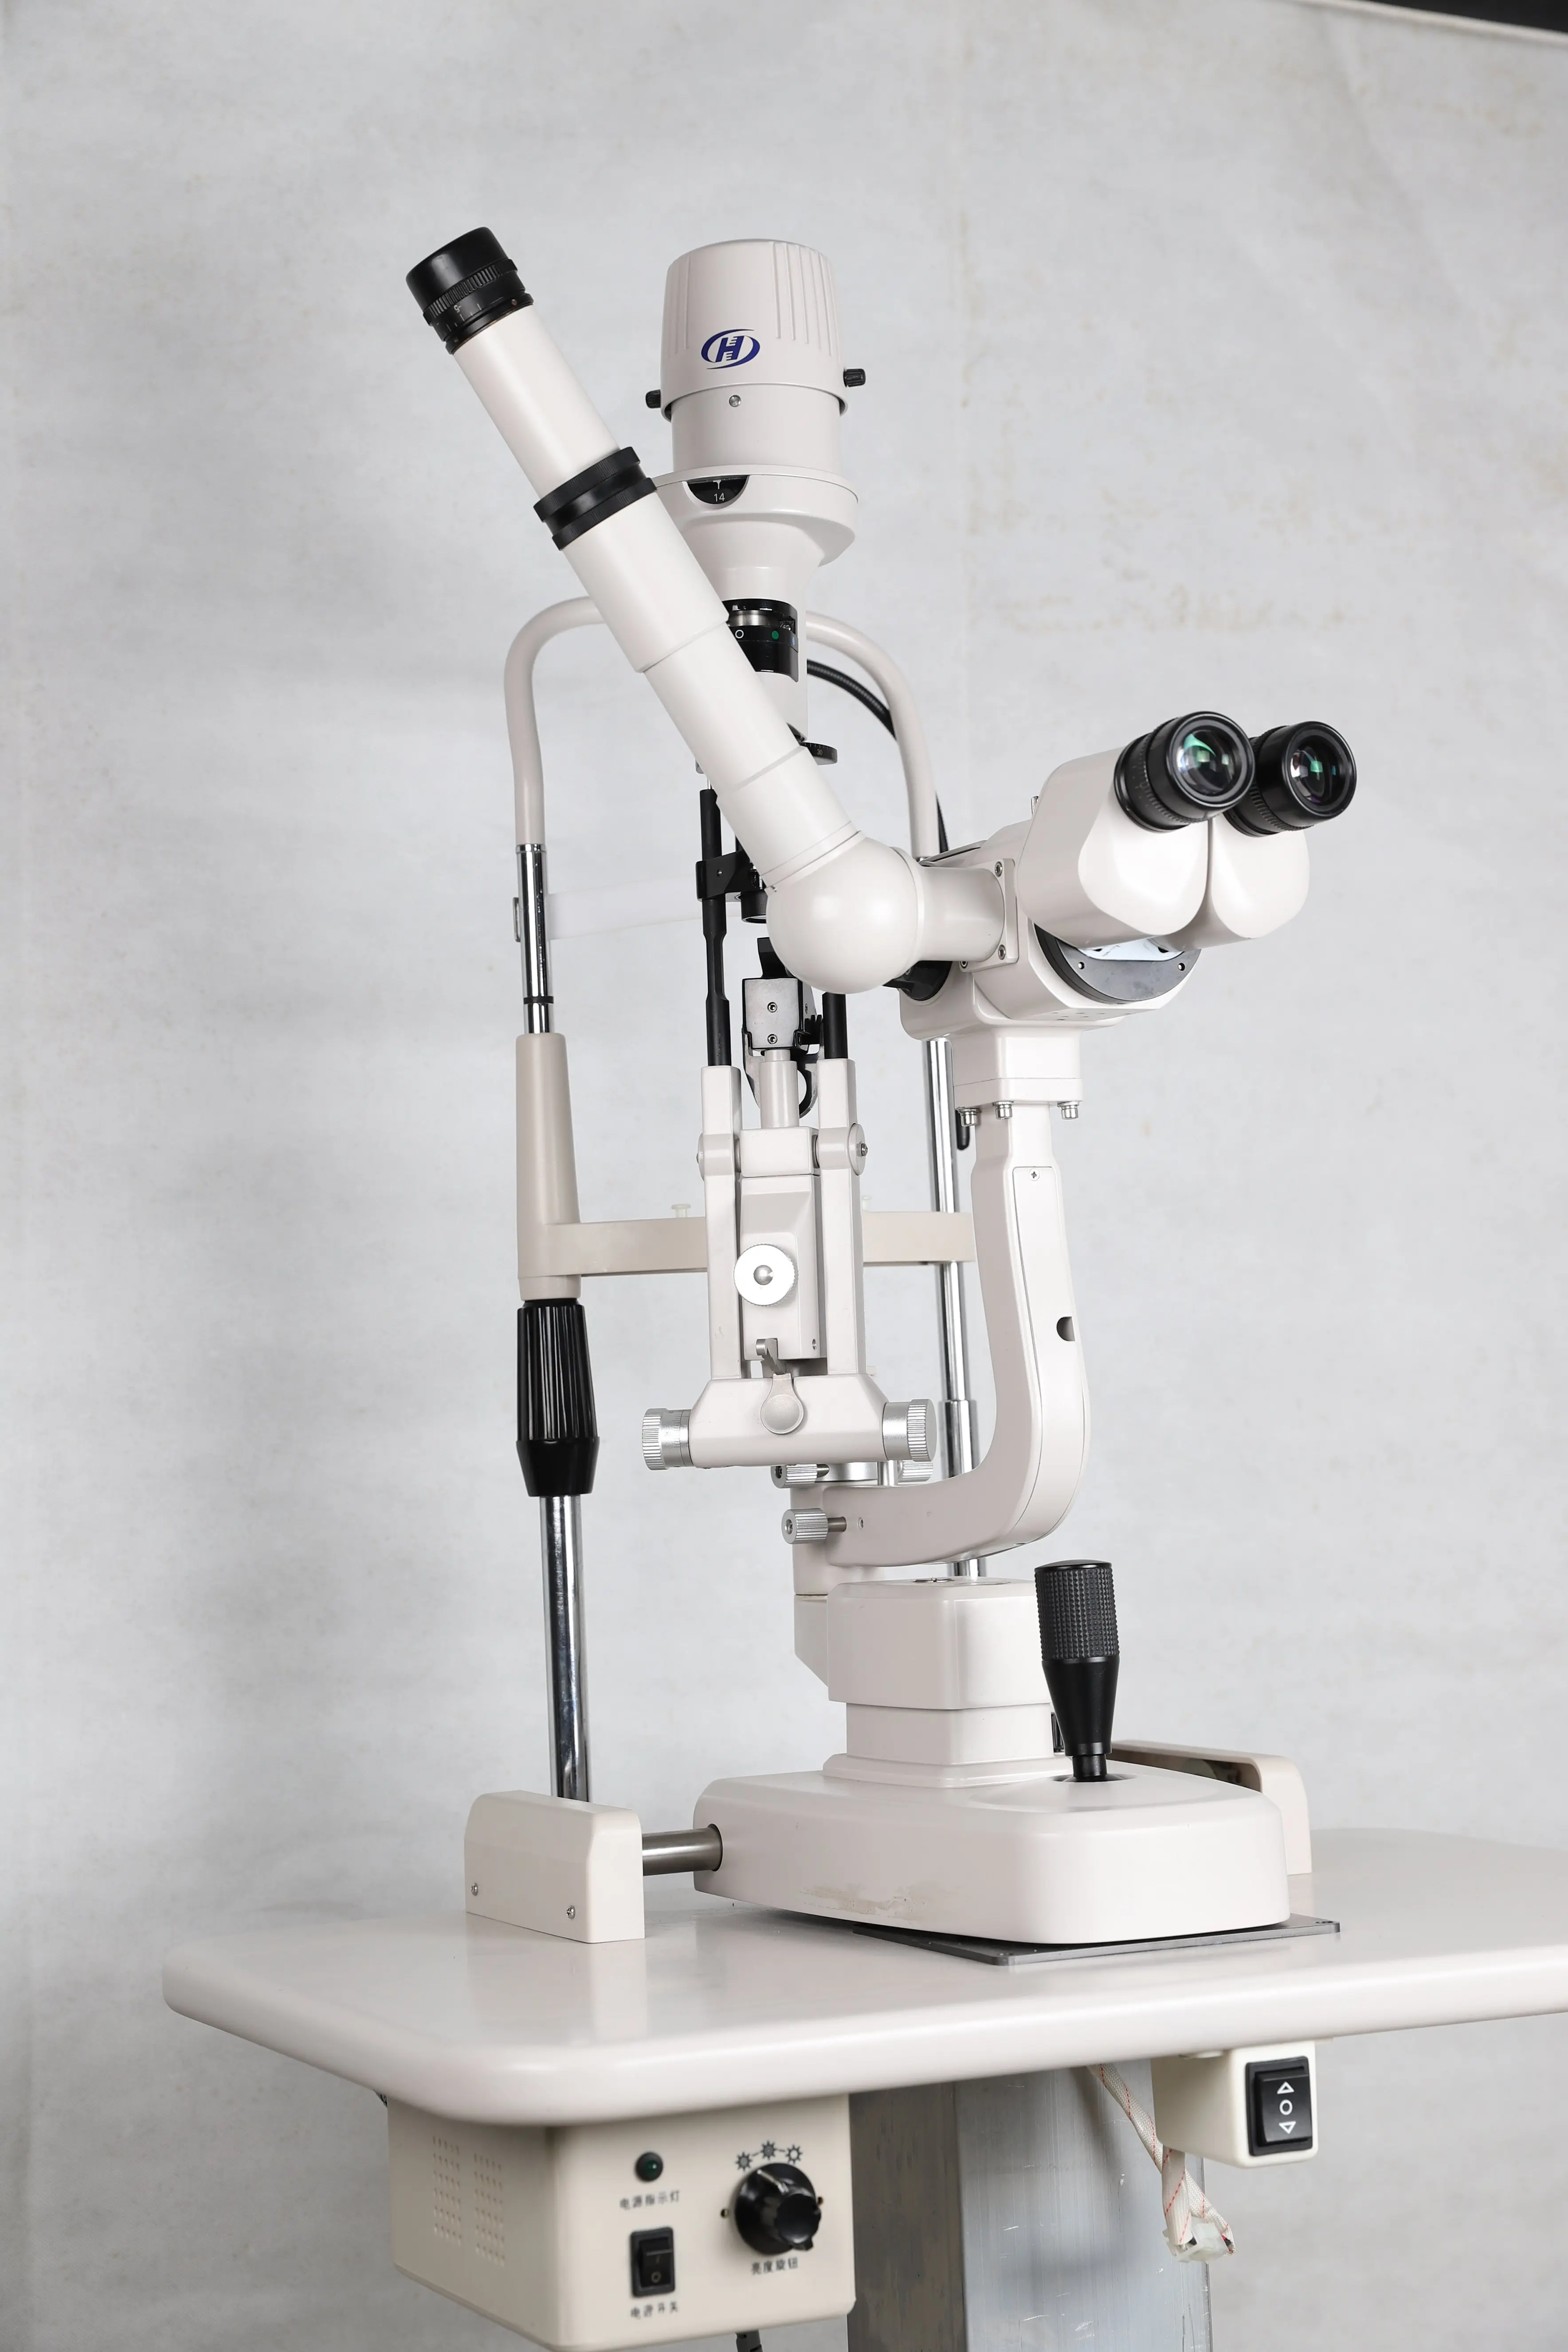 
Top Quality Kanghua 5 step slit lamp Ophthalmic Slit Lamp For Ophthalmology 